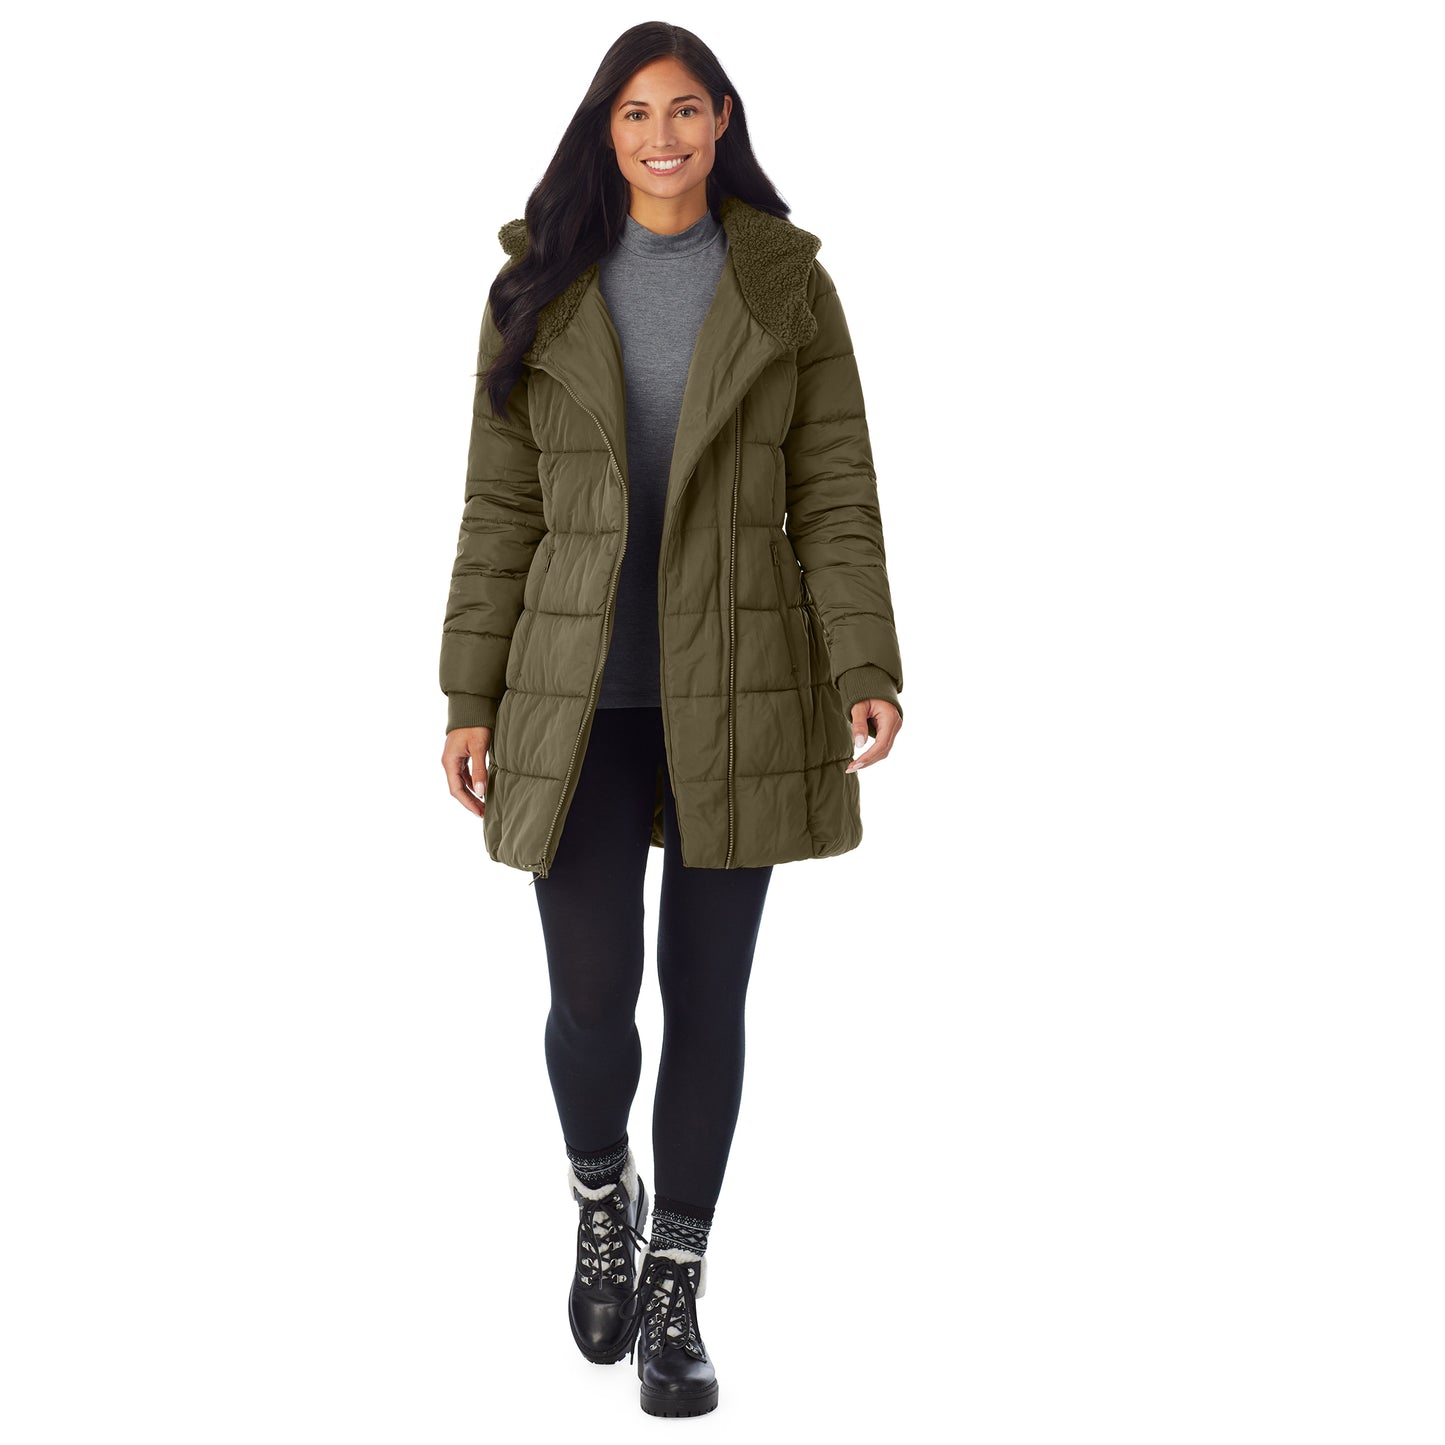 Rich Olive; Model is wearing size S. She is 5'8.5", Bust 32", Waist 25", Hips 36".@a lady wearing olive long puffer coat